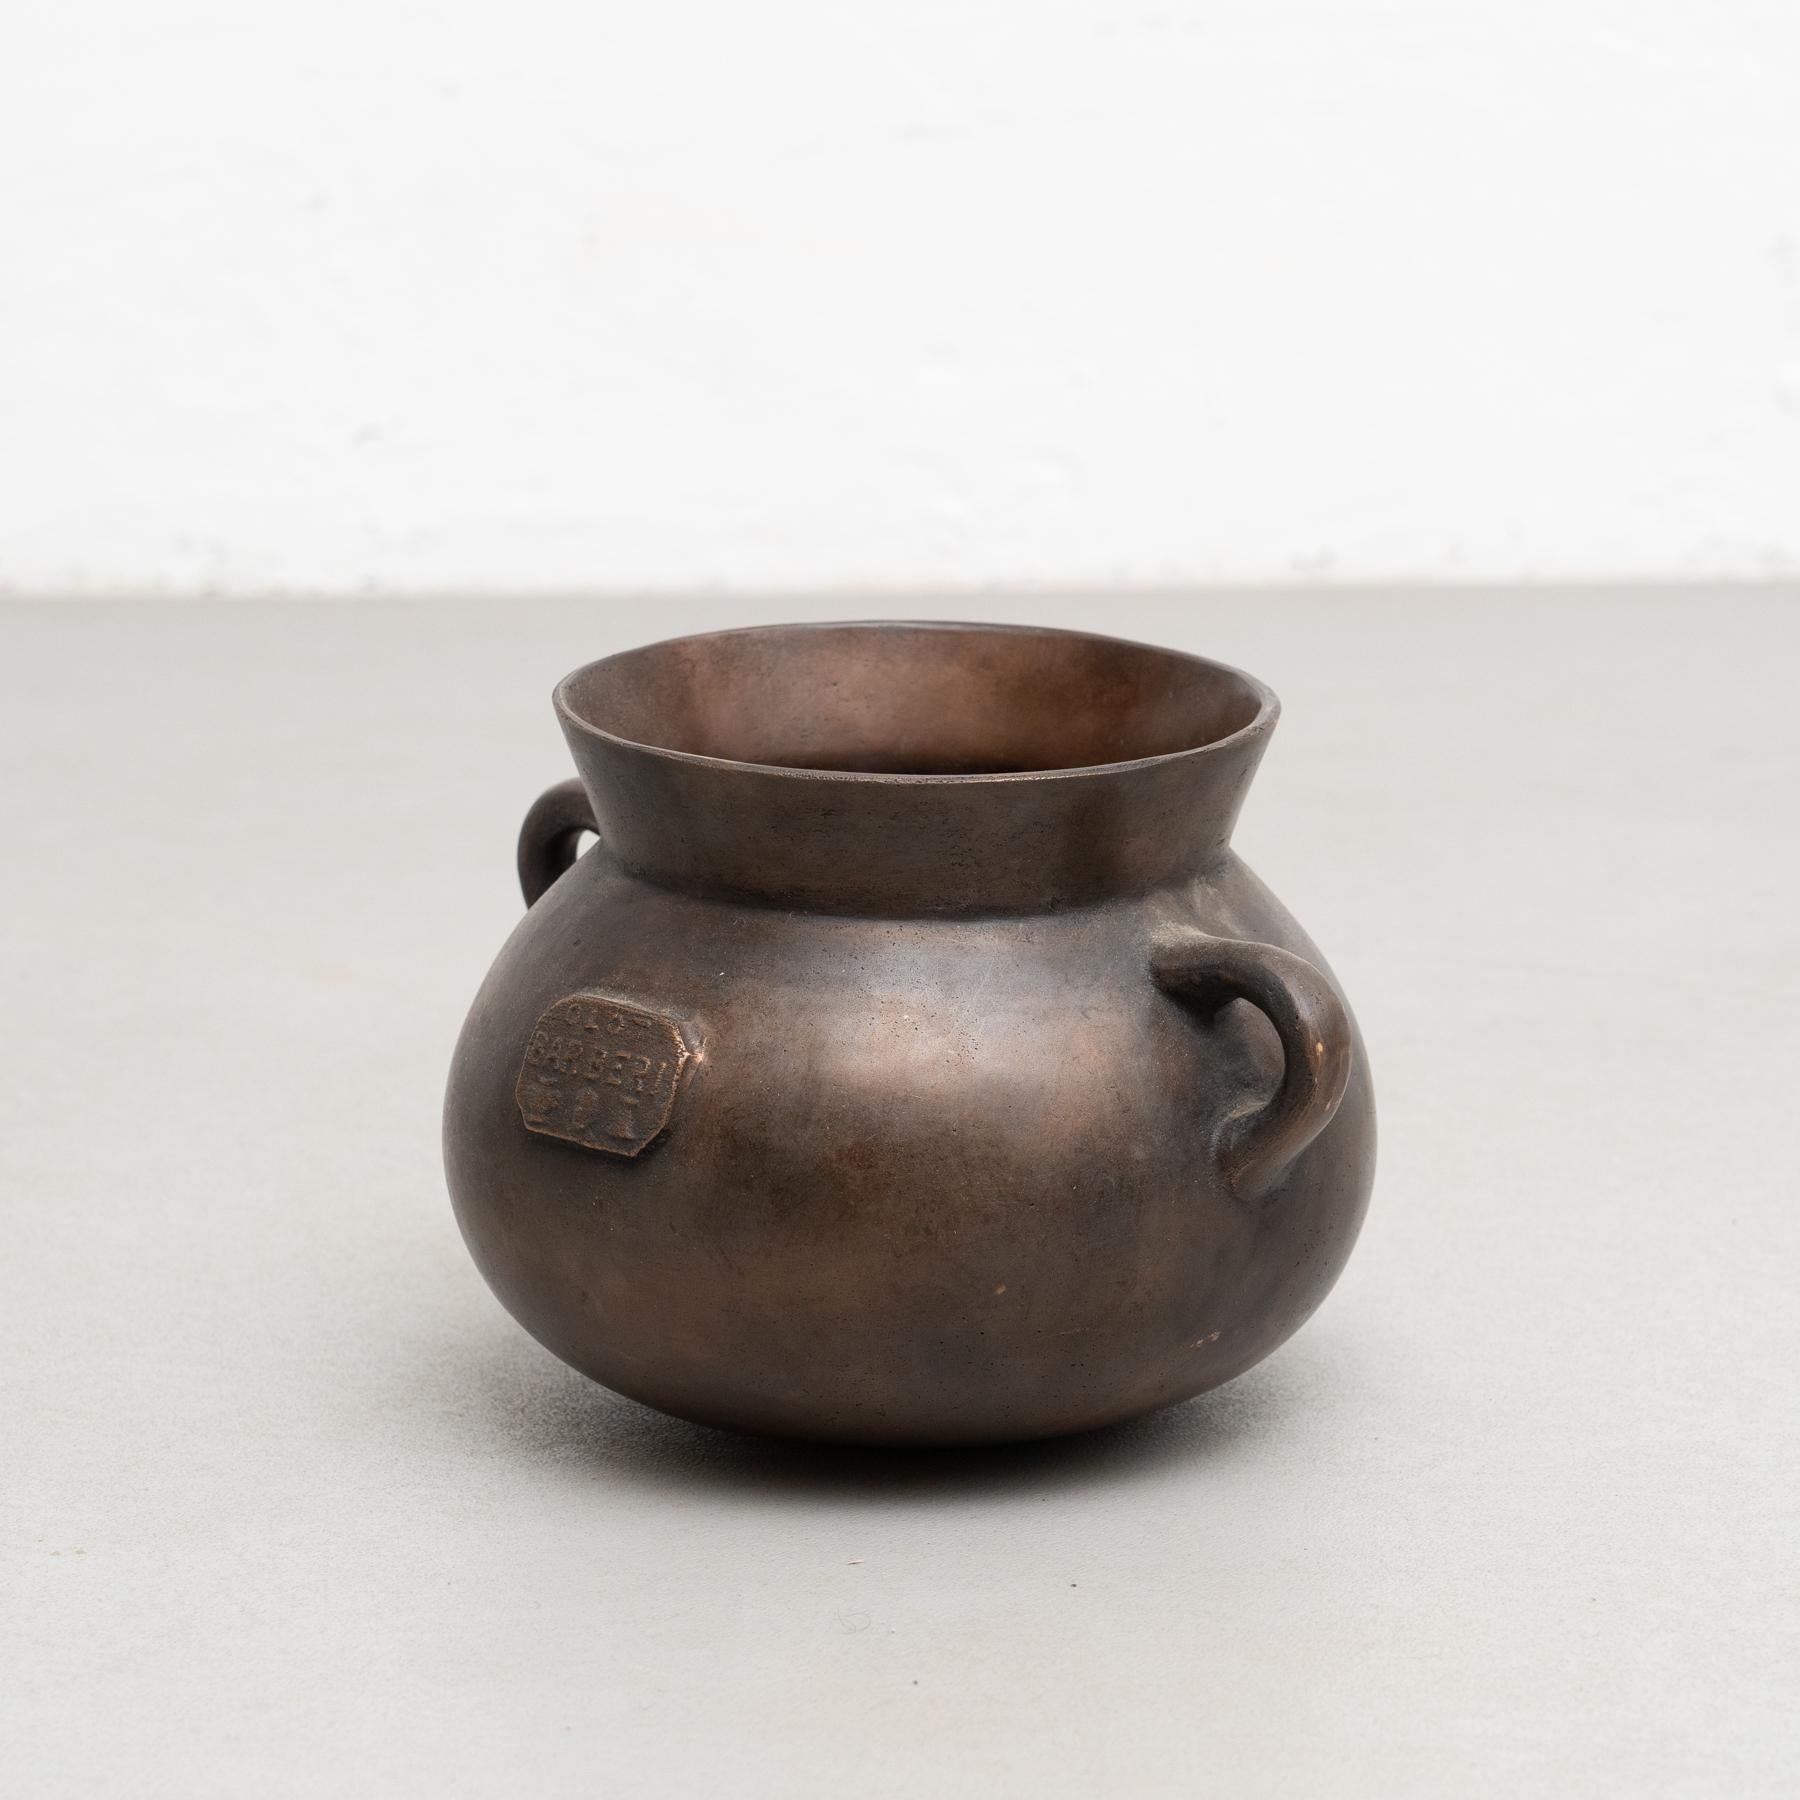 Rare Vintage bronze pot. 

Marked.

By Barberí foundry in Olot, Spain circa 1950.

In original condition, with minor wear consistent with age and use, preserving a beautiful patina.

Materials:
Bronze.
 